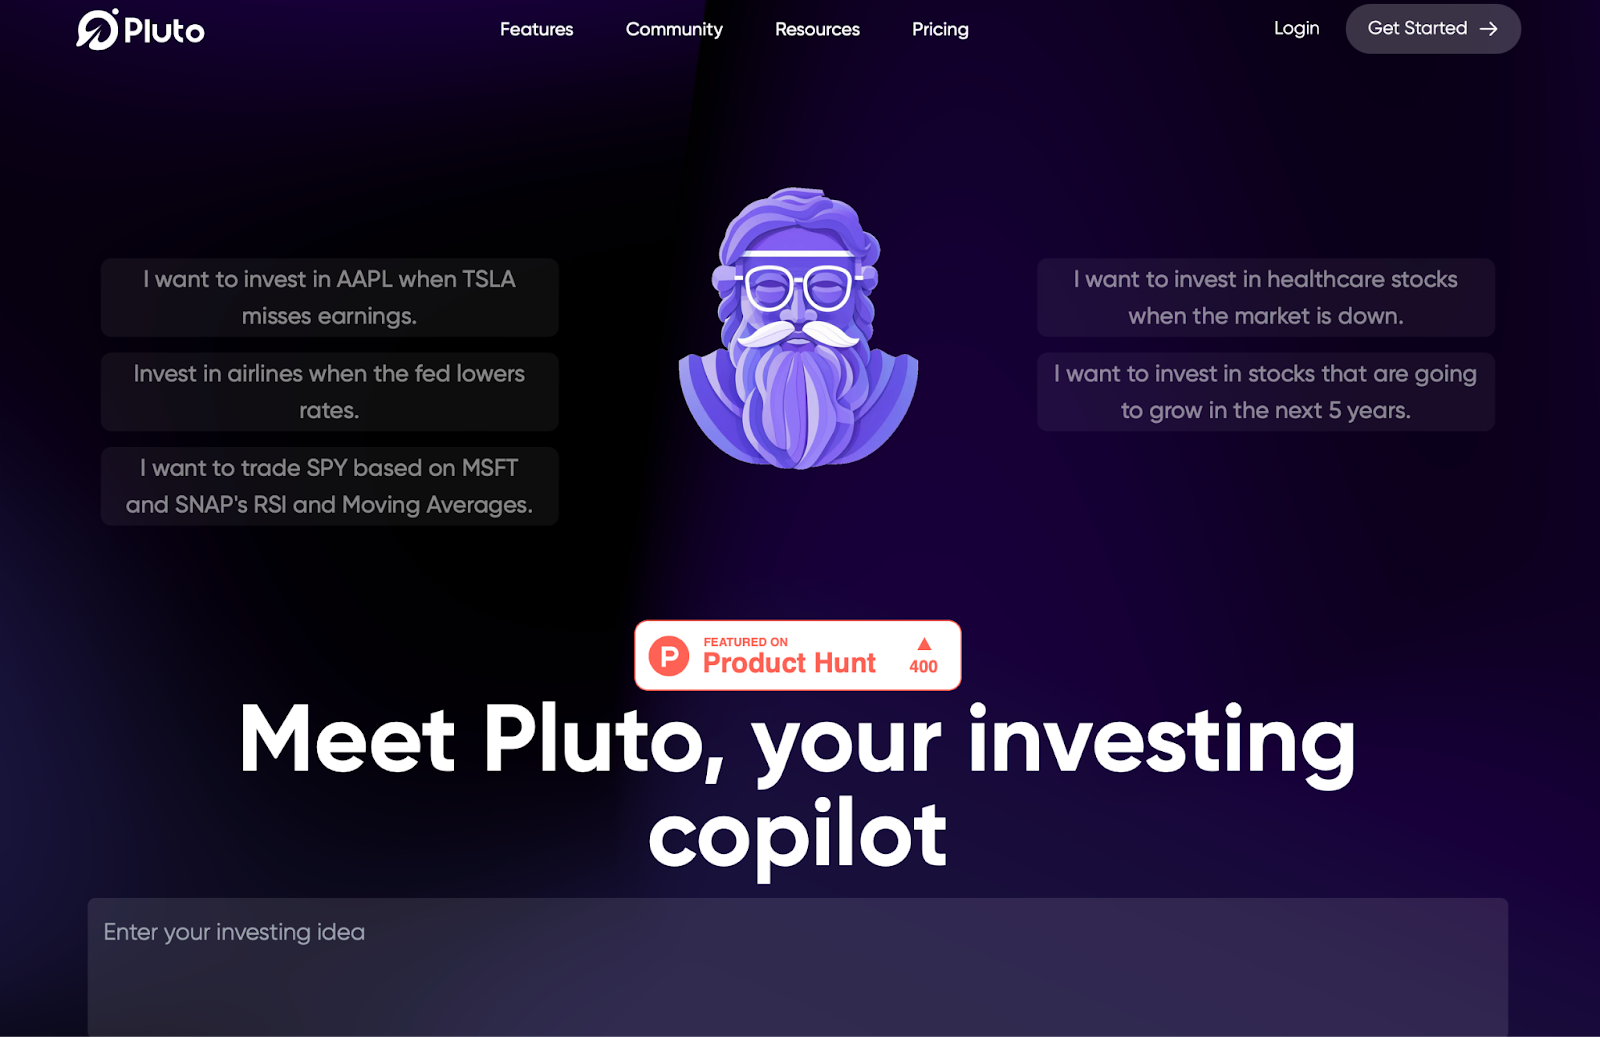 Pluto is an AI-powered investment copilot